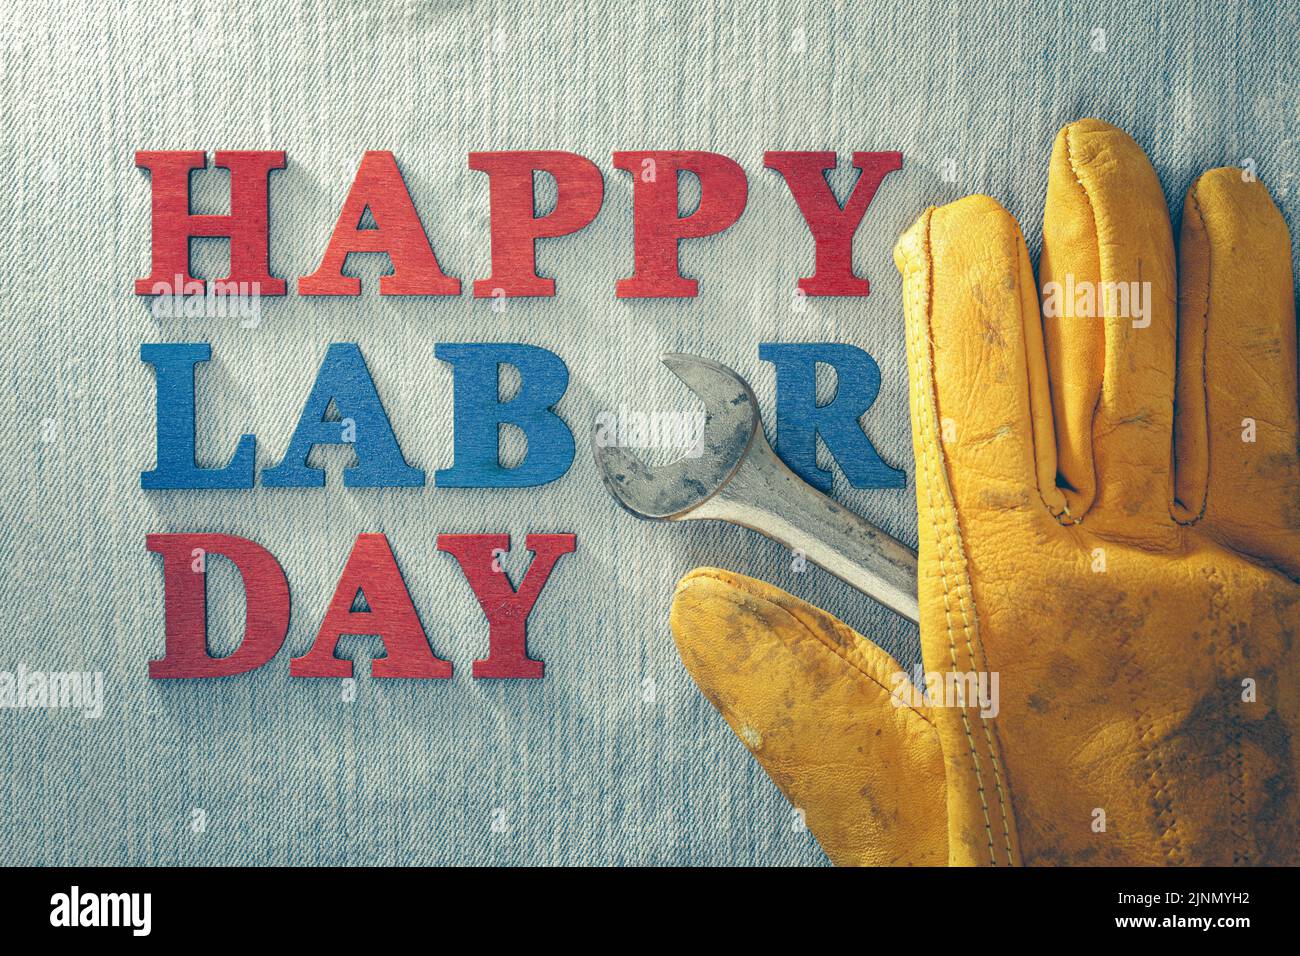 Worn and weathered work glove and wrench with Happy Labor Day text, celebrating American workers. Stock Photo